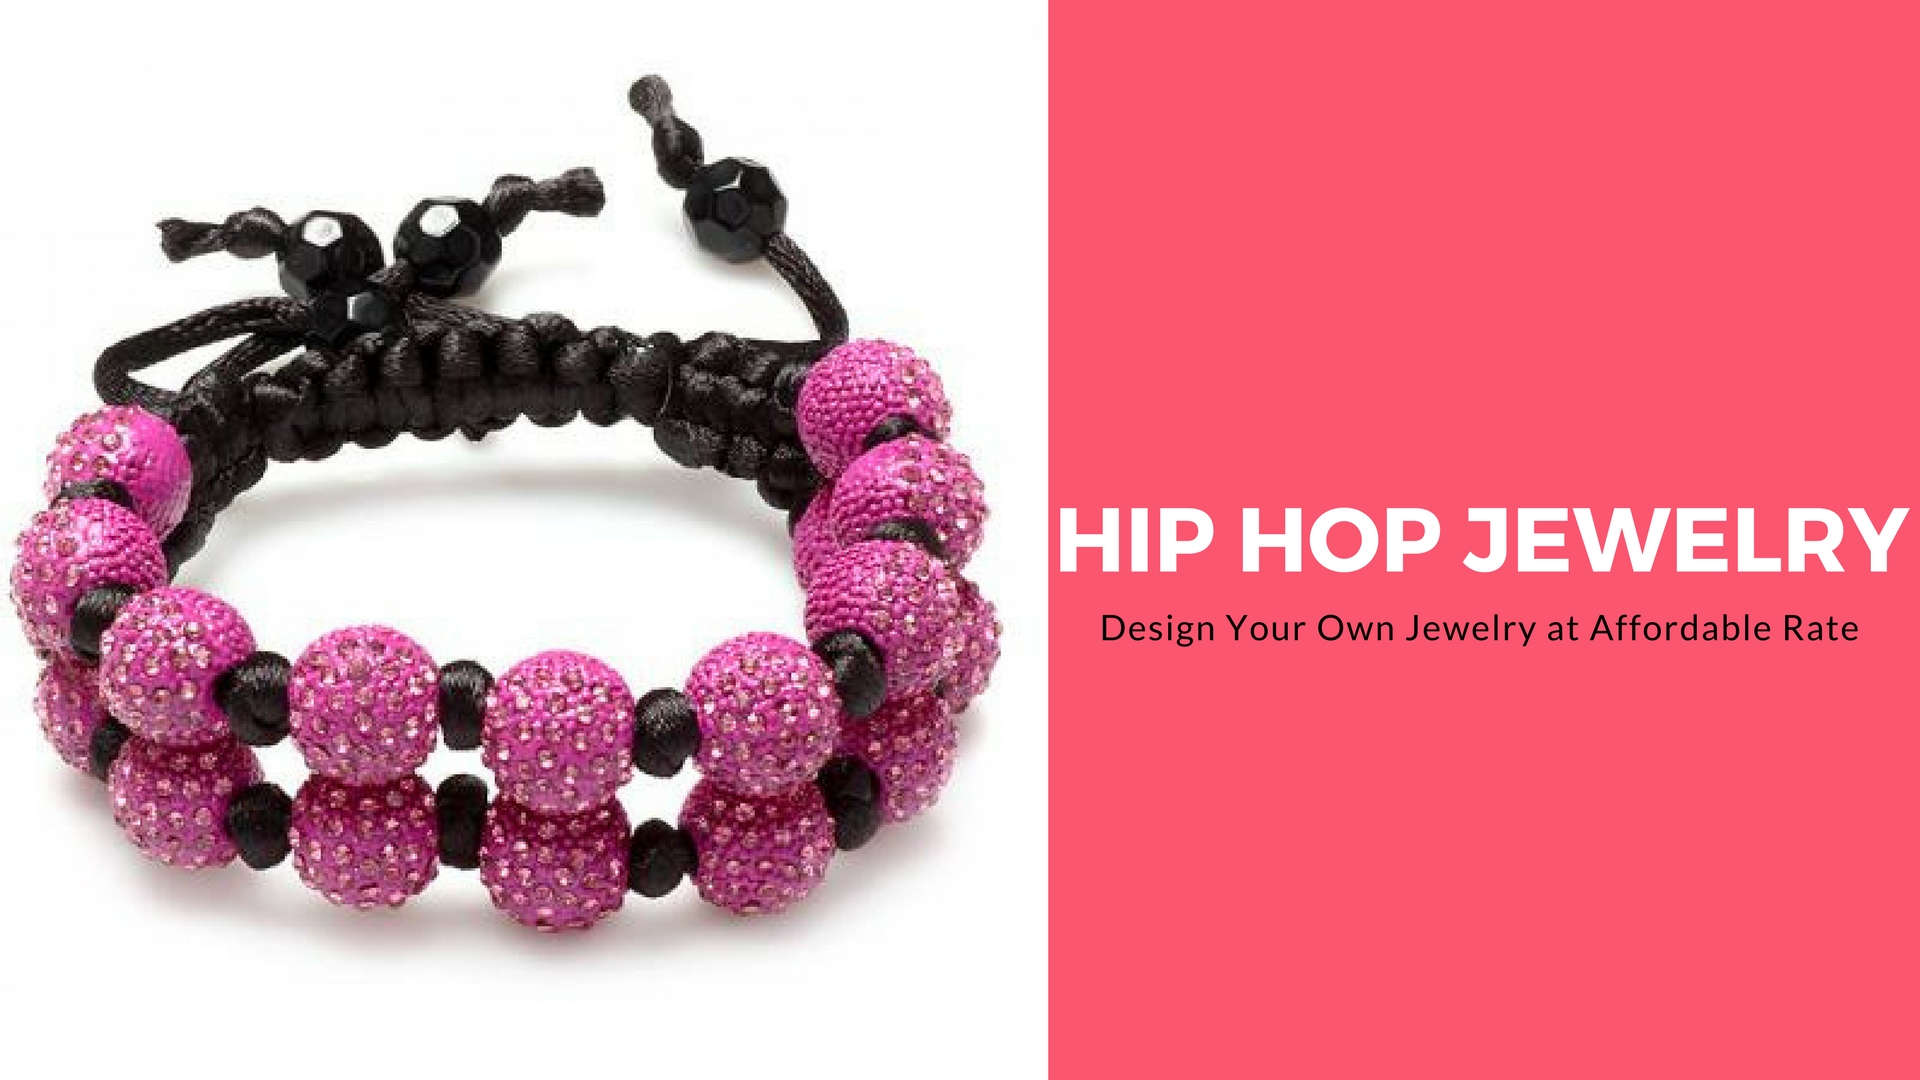 Design Your Own Hip Hop Jewelry Set at Affordable Rate - Dazzlingrock.com